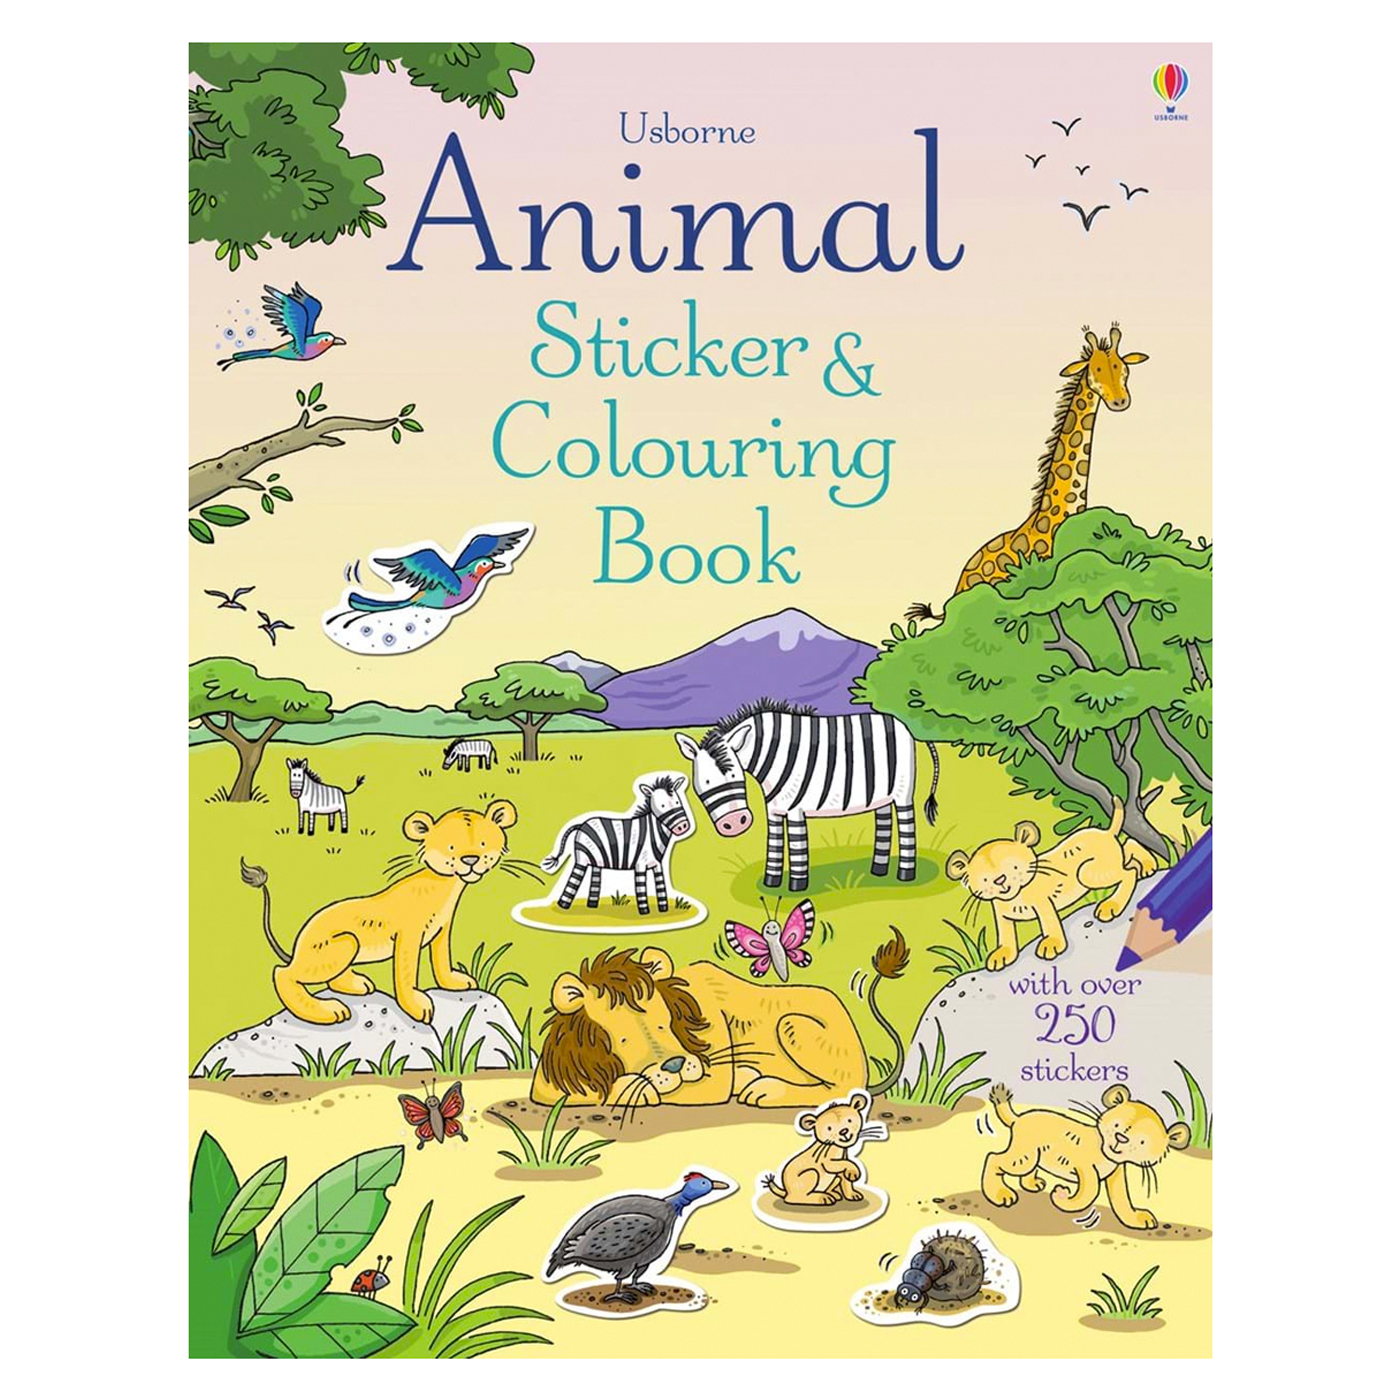  Animal Sticker and Colouring Book